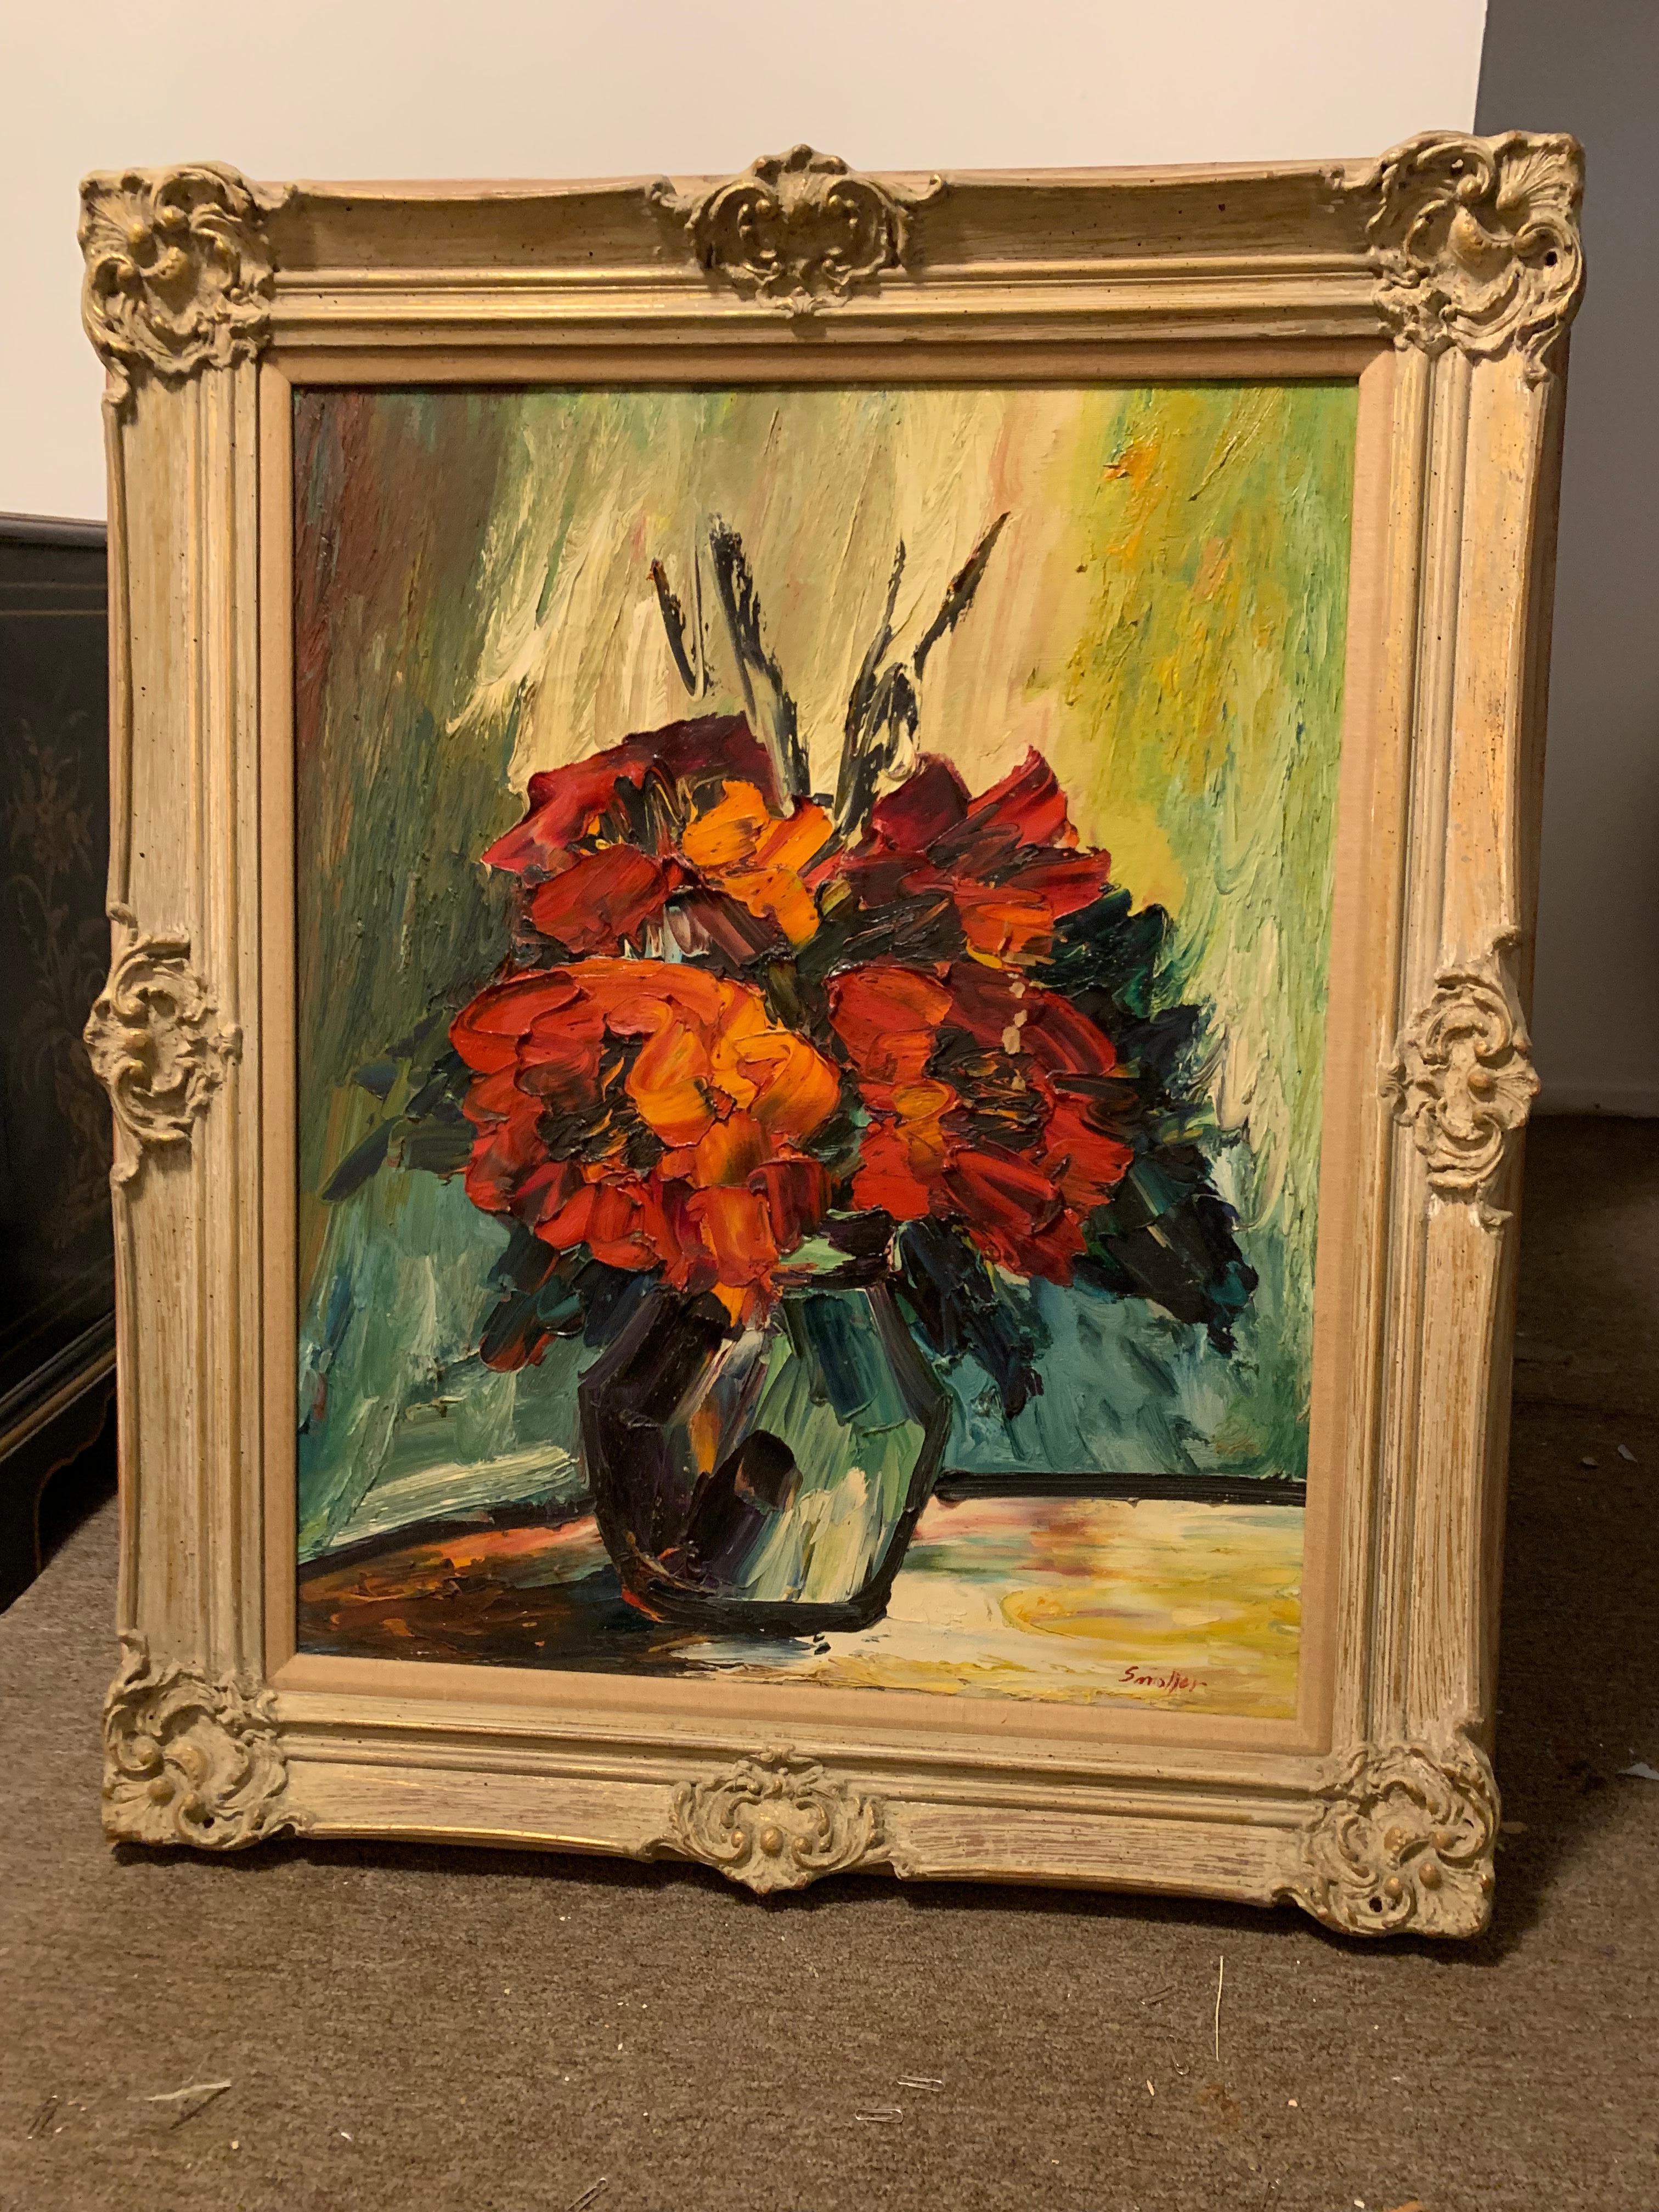 Listed American Artist, Irene Smoller, signed this spectacular still life, rich red and orange flowers in vase, an original oil on large canvas. Smoller was a midcentury Expressionistic artist who is well known for her Floral pieces as well as